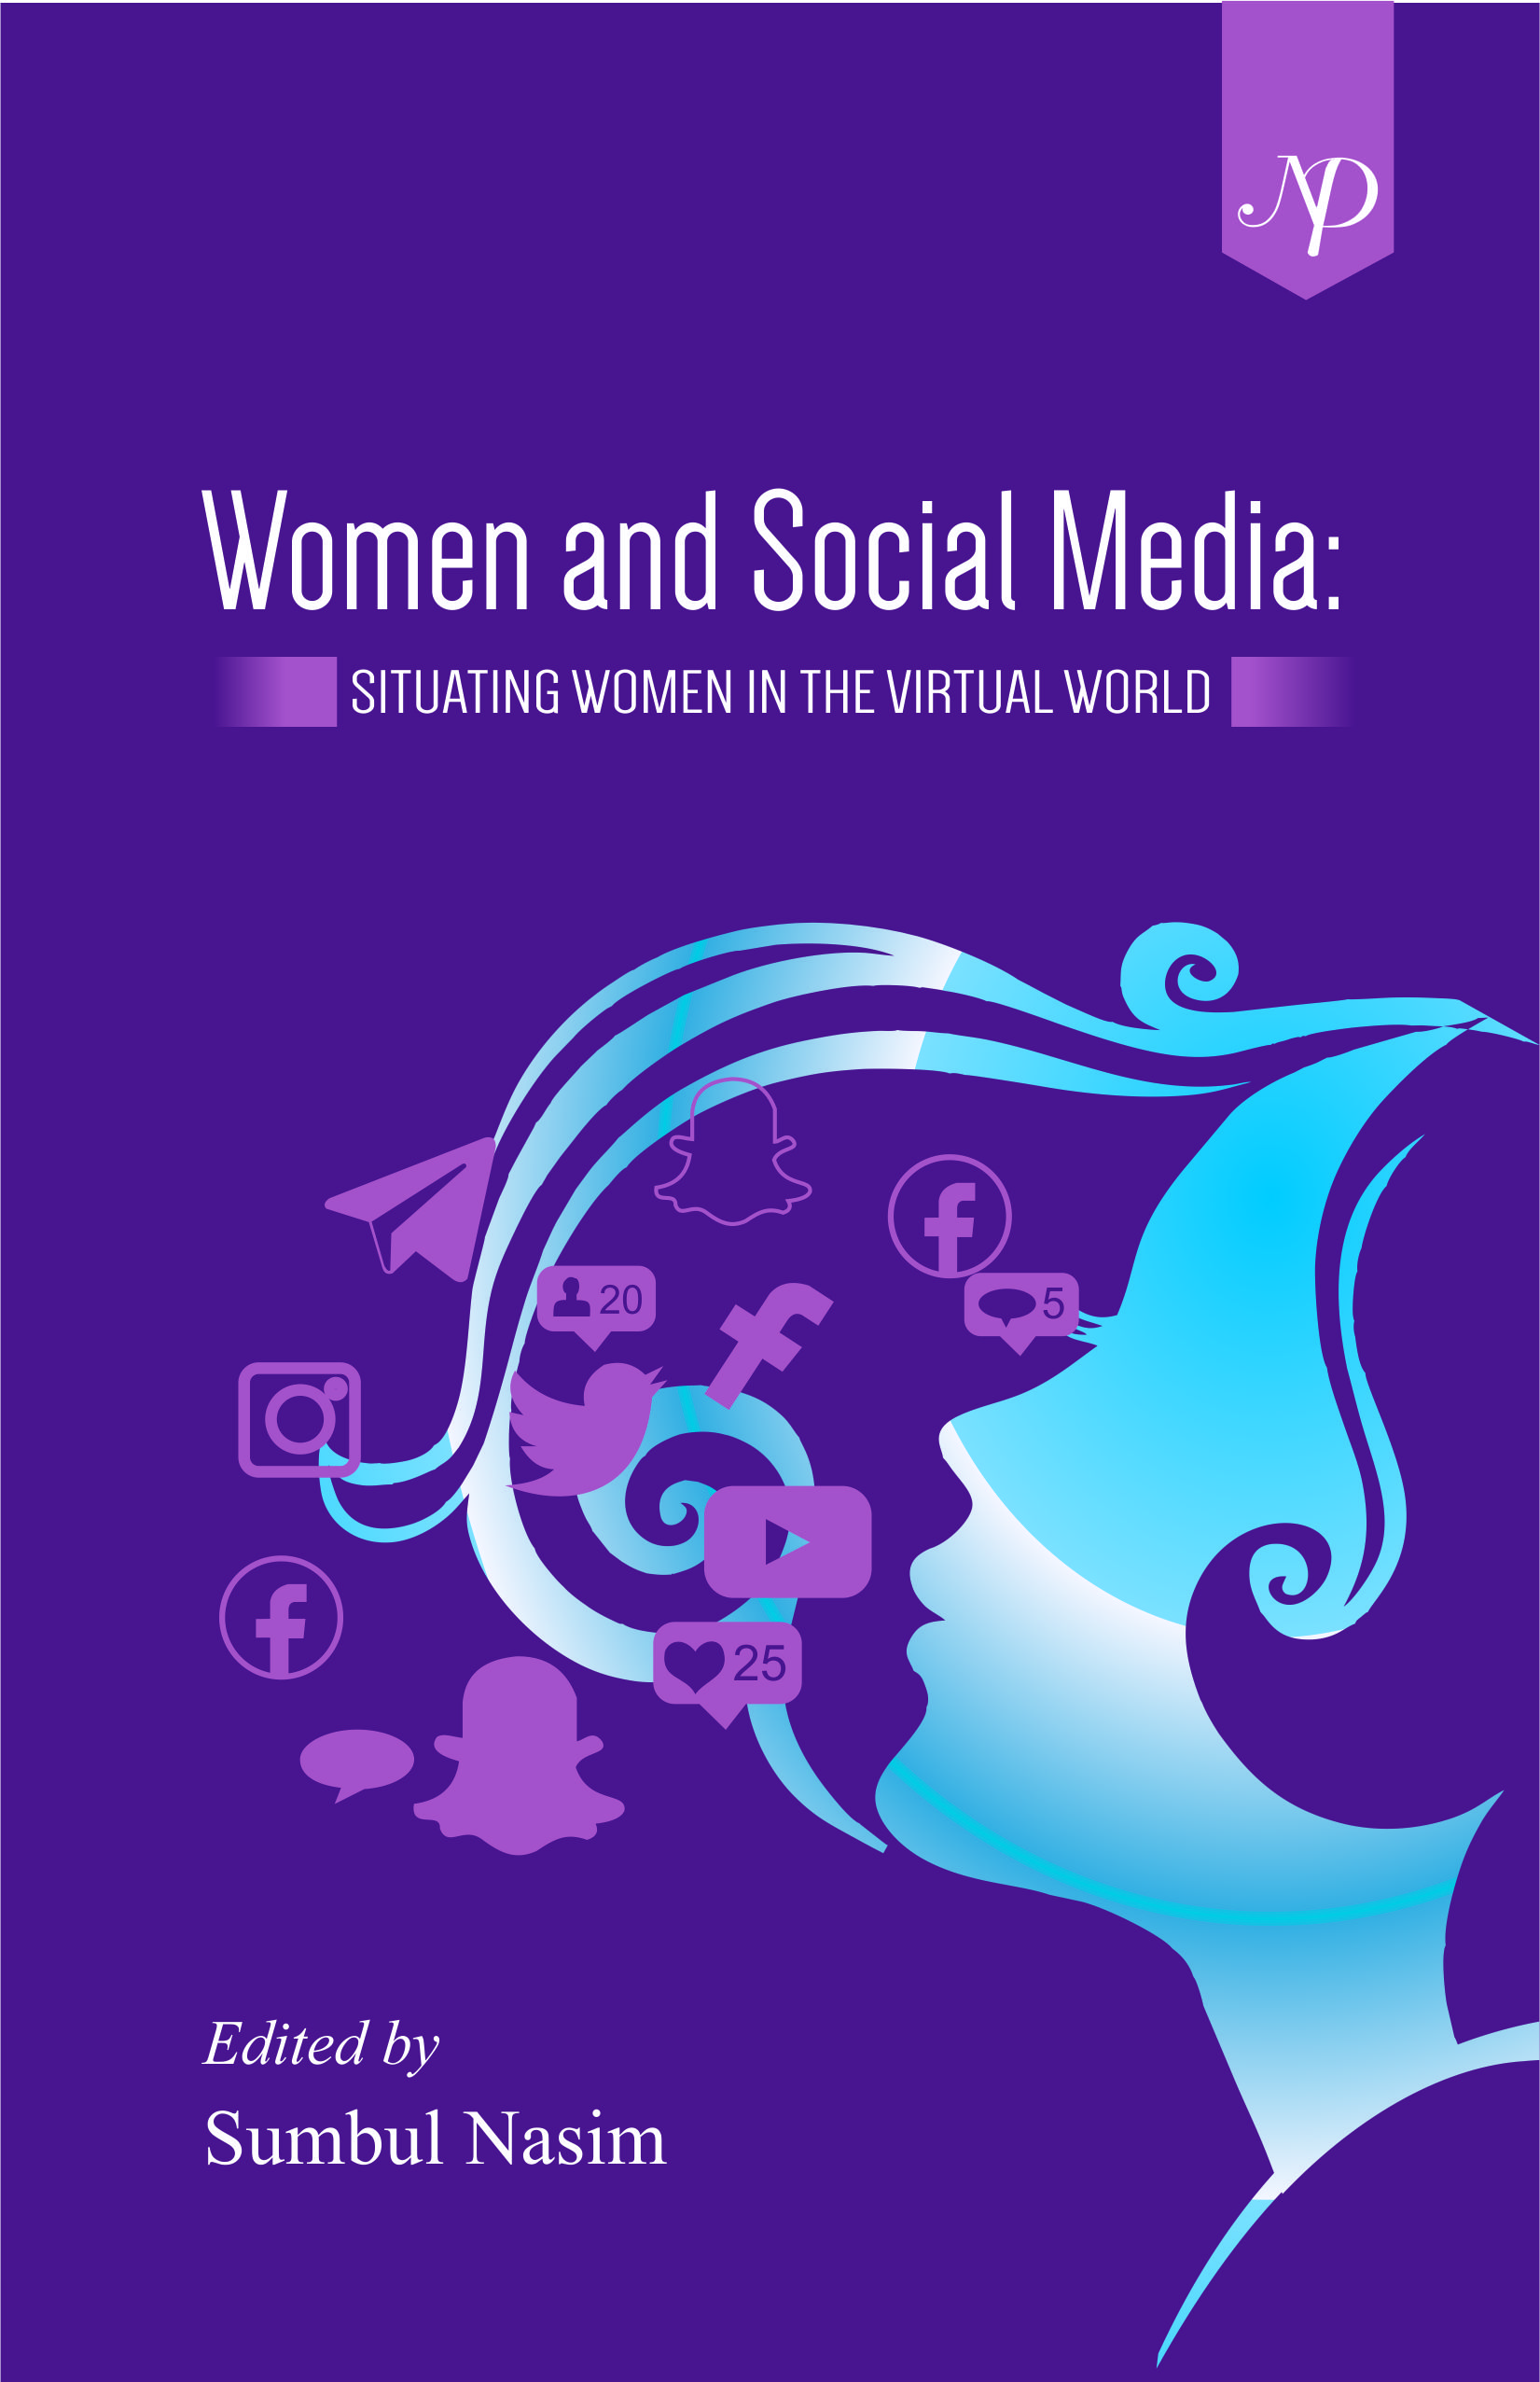 Women and Social Media: Situating Women in the Virtual World